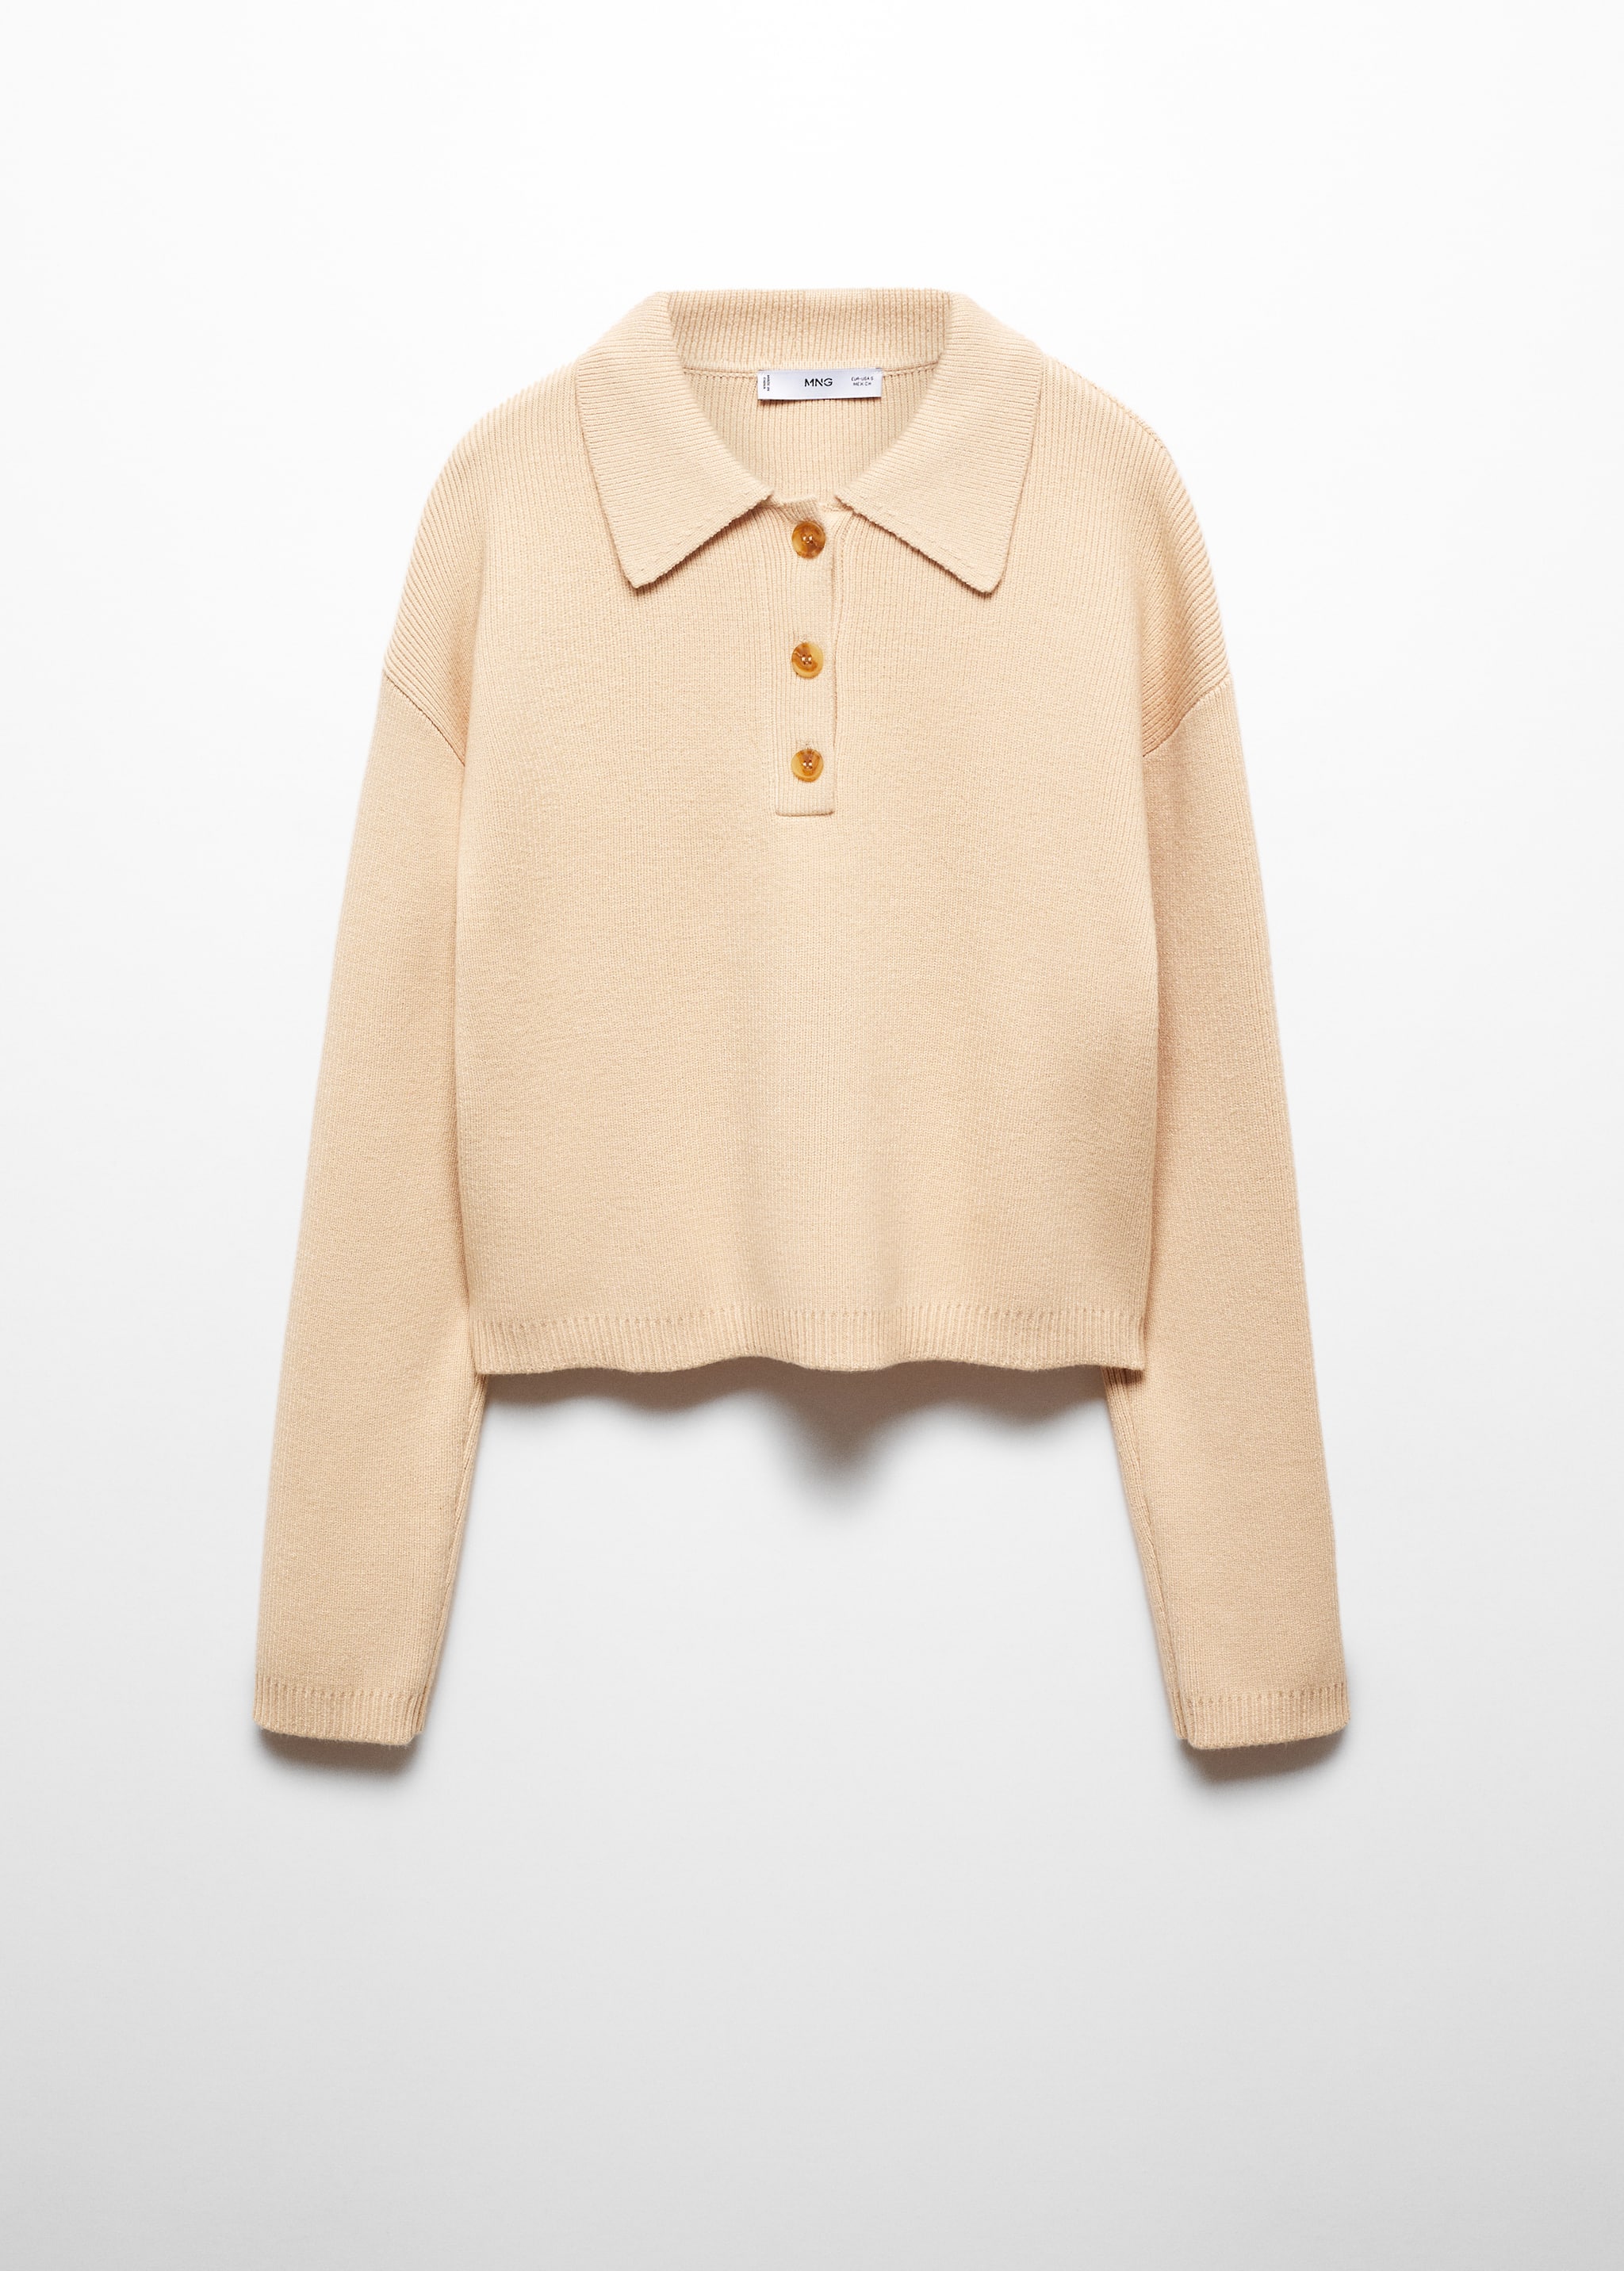 Buttoned collar knit sweater - Article without model